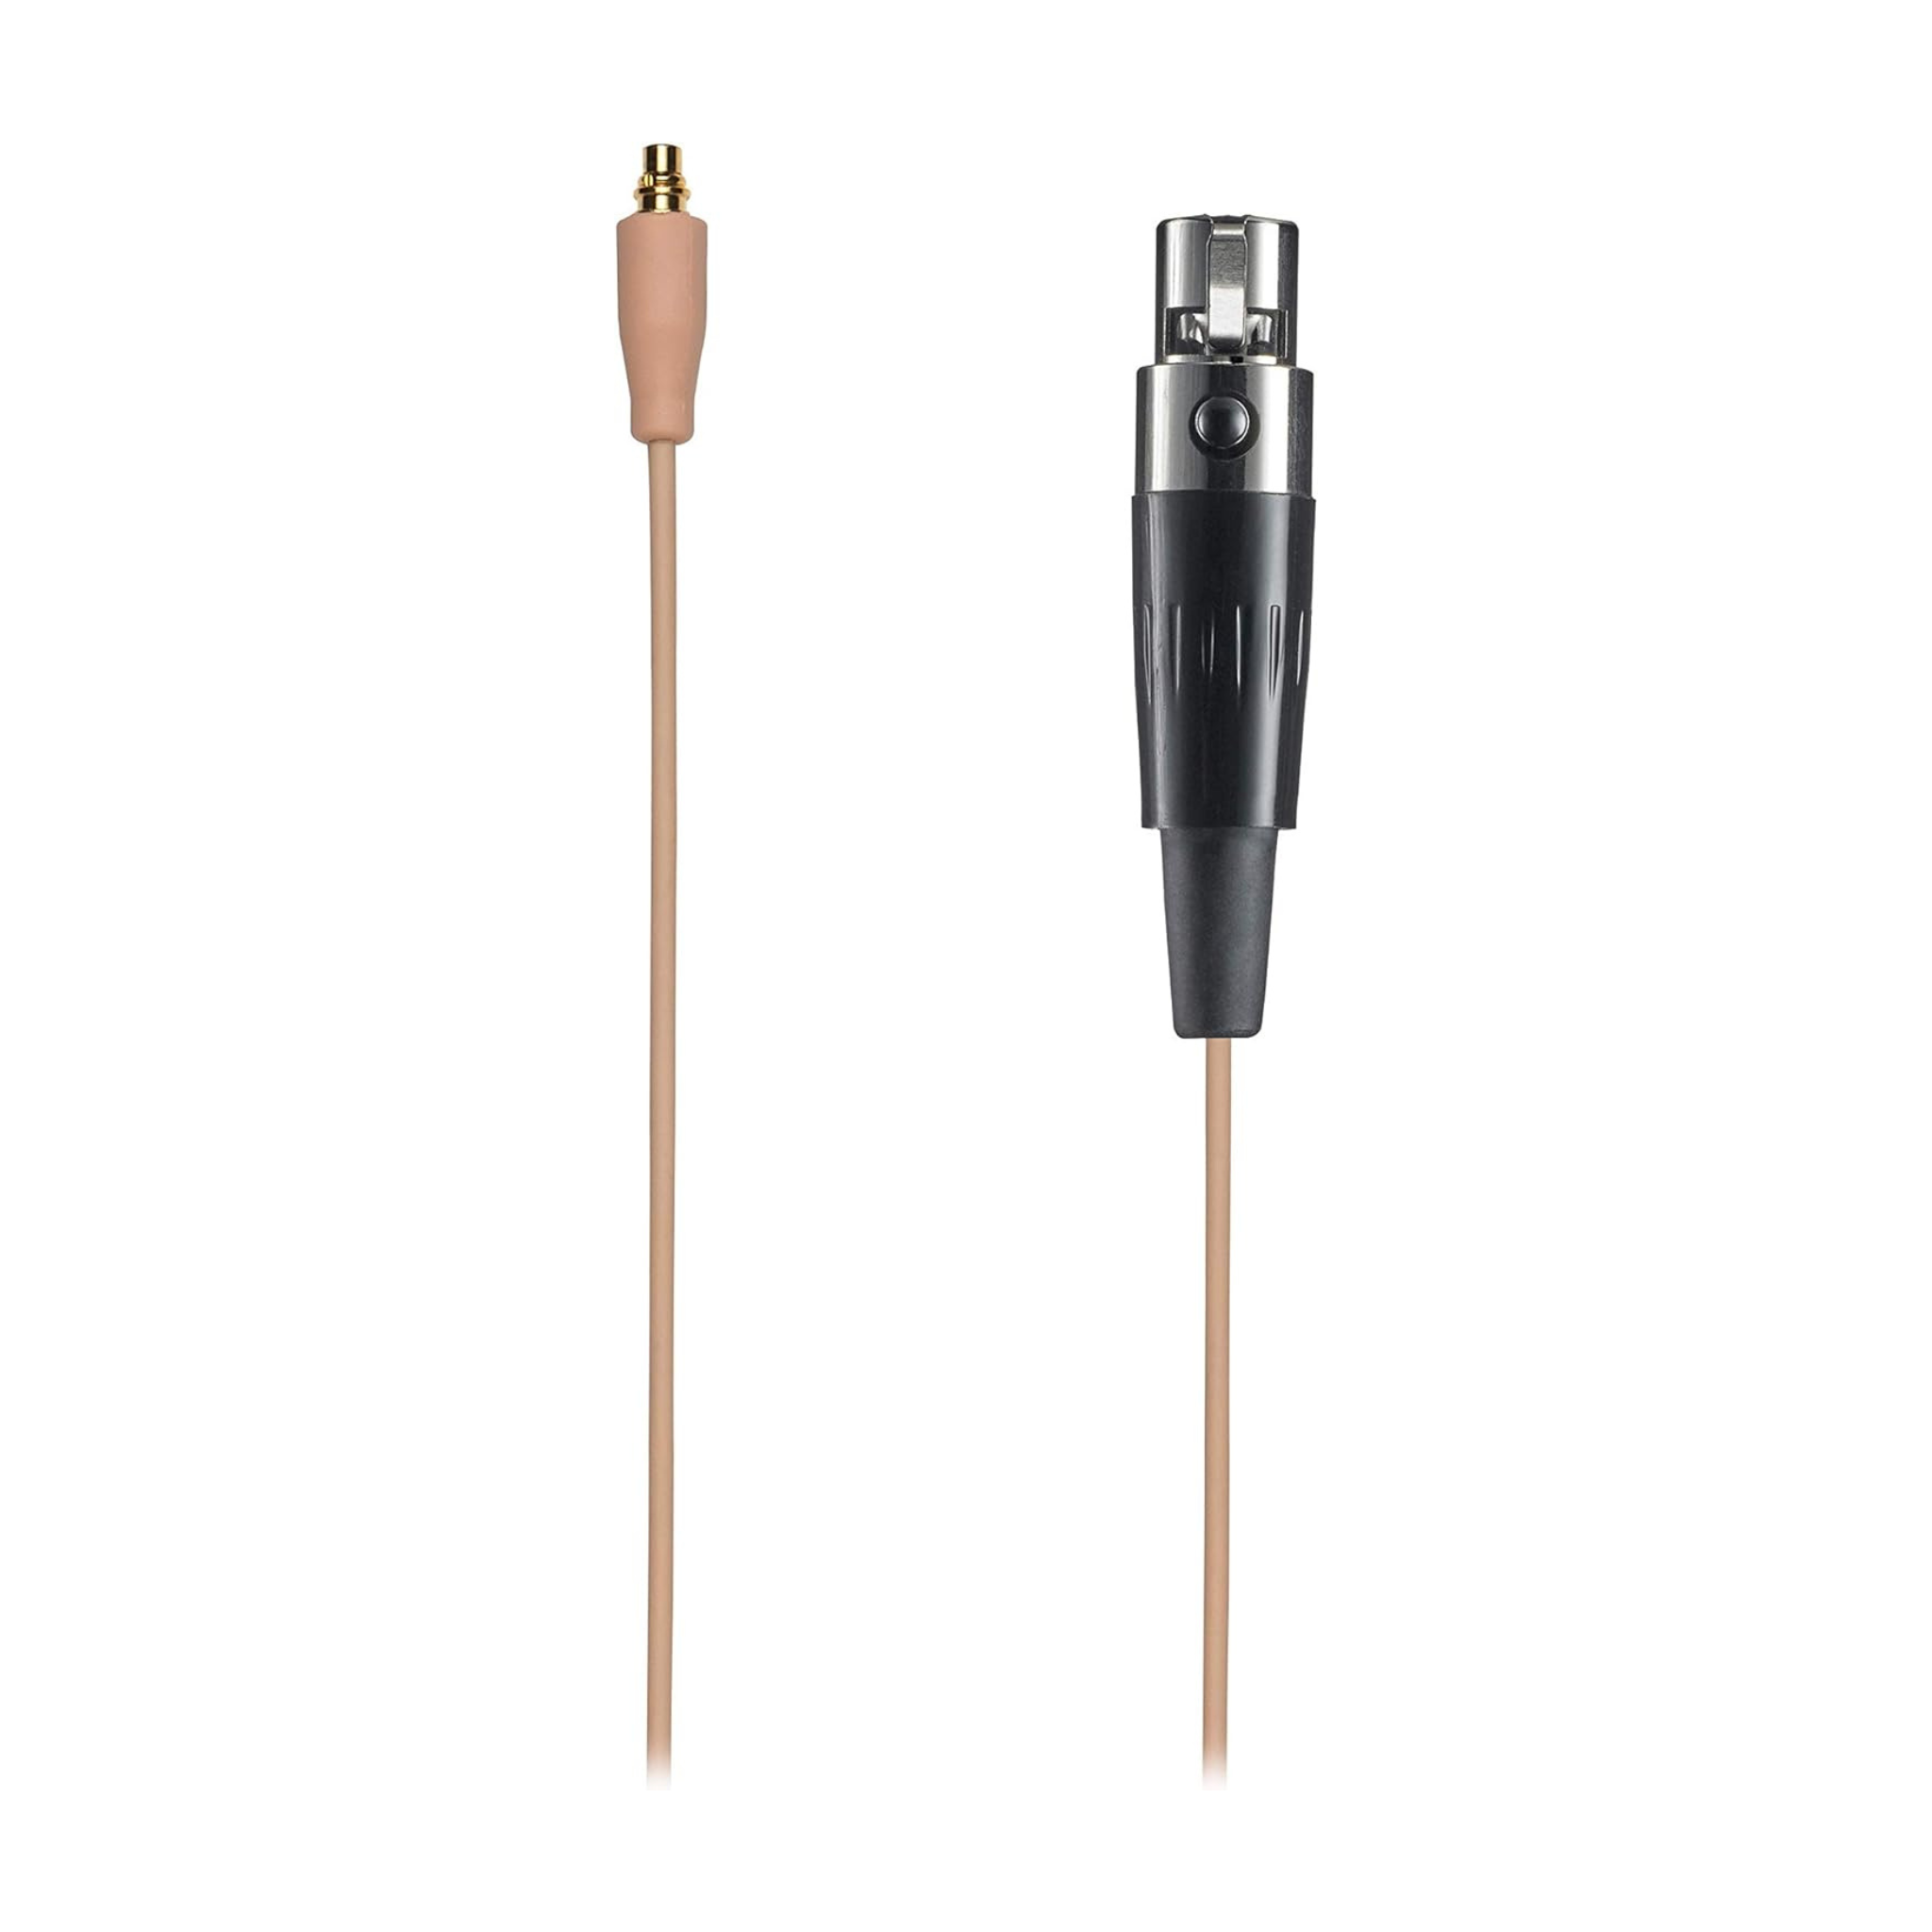 Audio-Technica Replacement Cable For Ear Mic T4